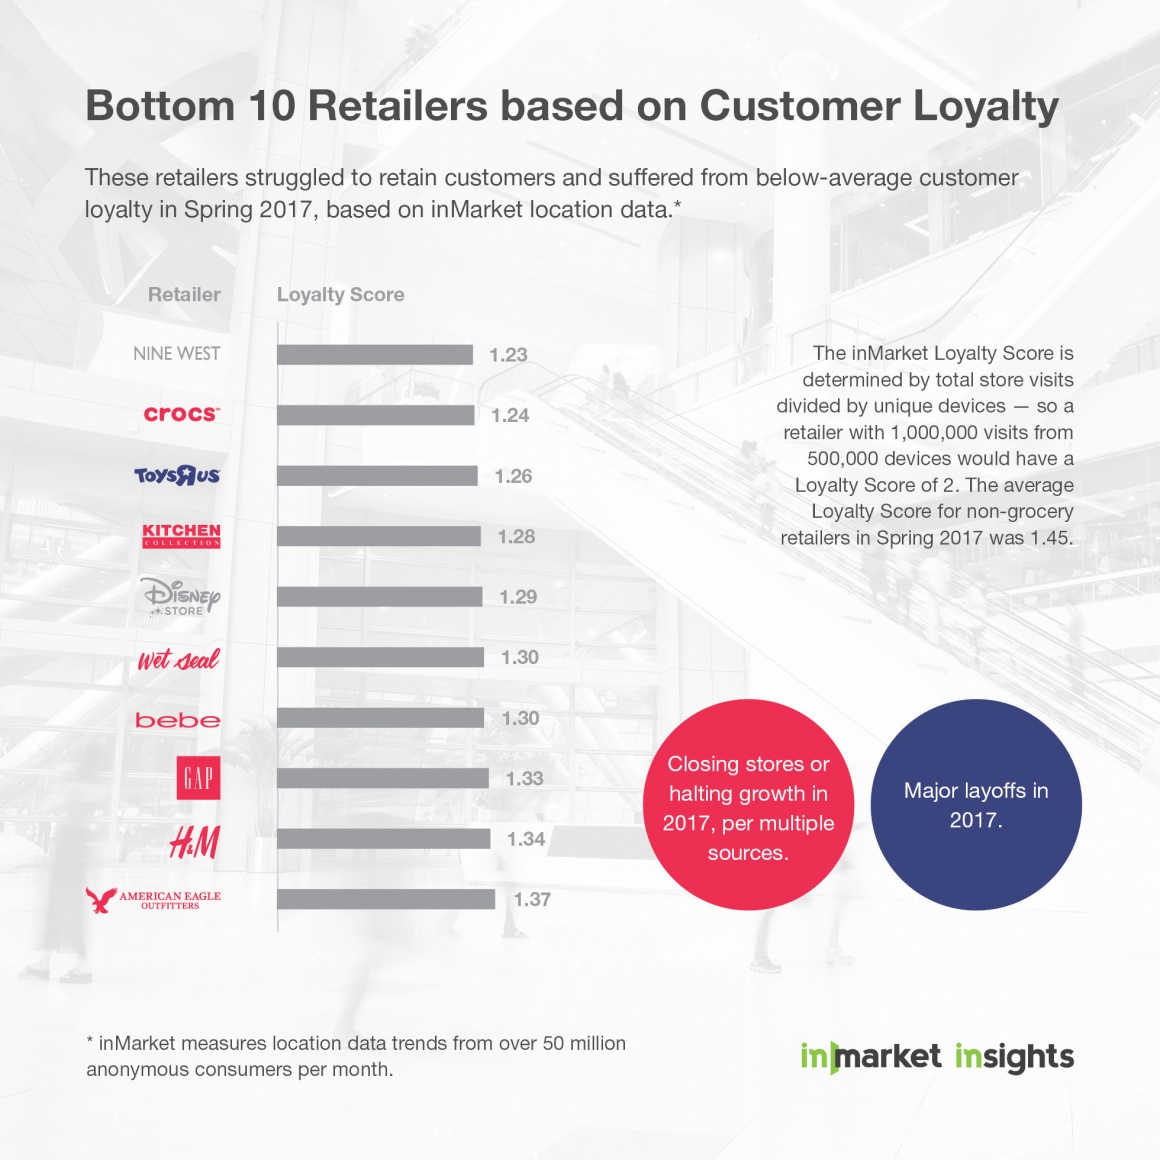 Eight of the bottom 10 retailers for customer loyalty are closing stores,...